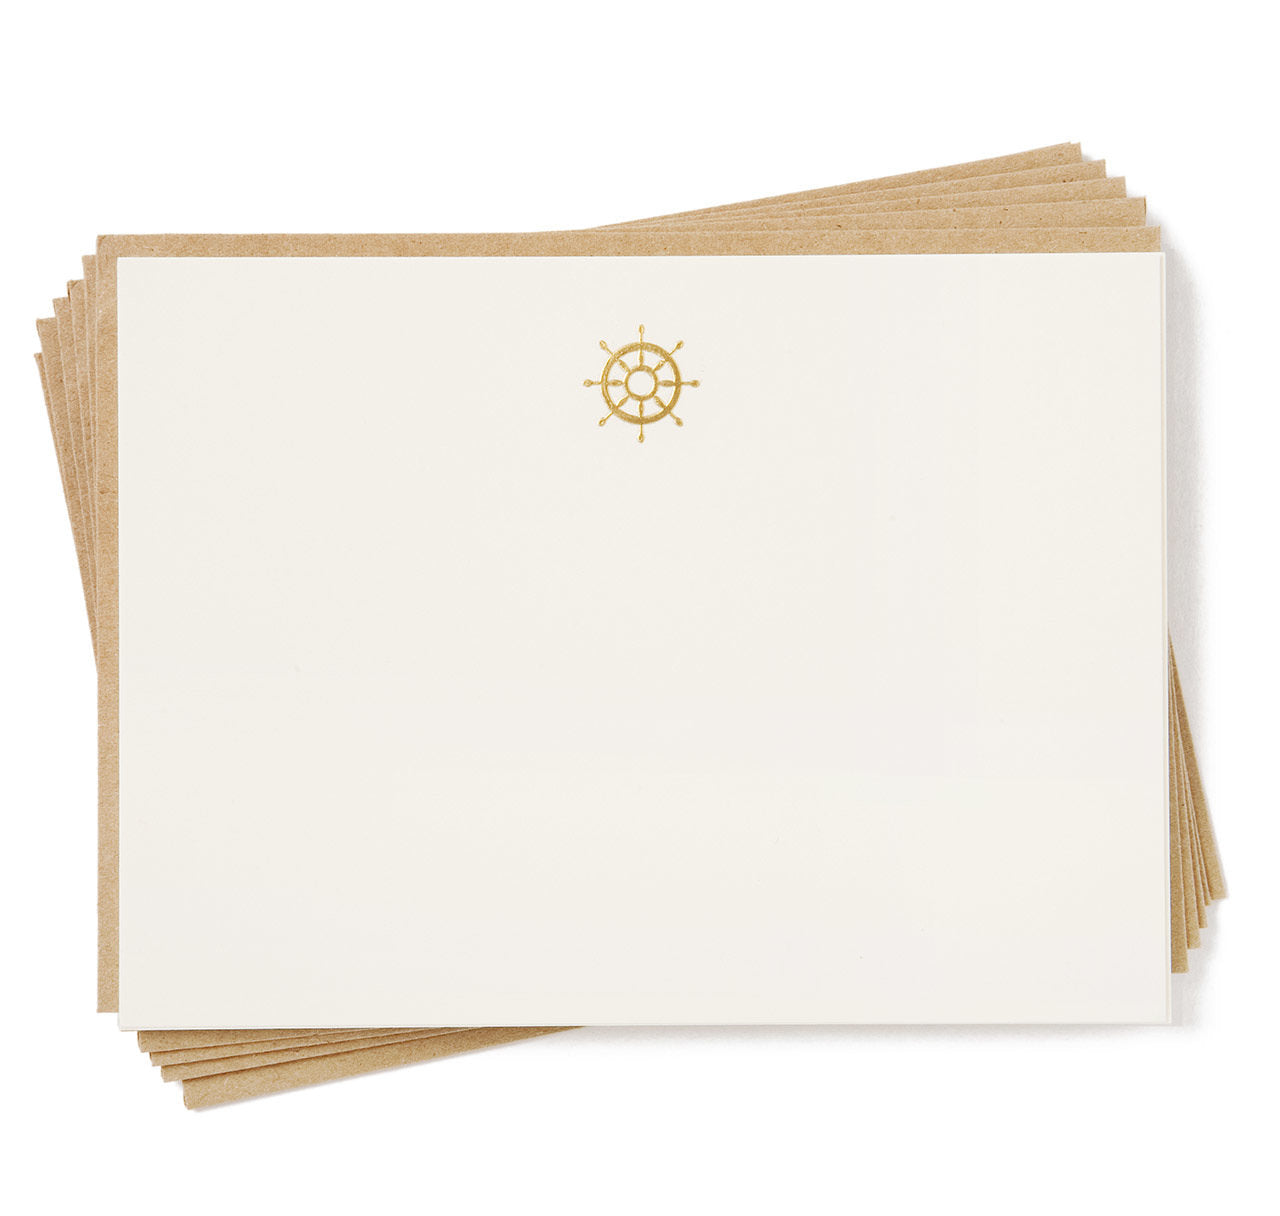 Terrapin Stationers Engraved Golden Nautical Stationery Set